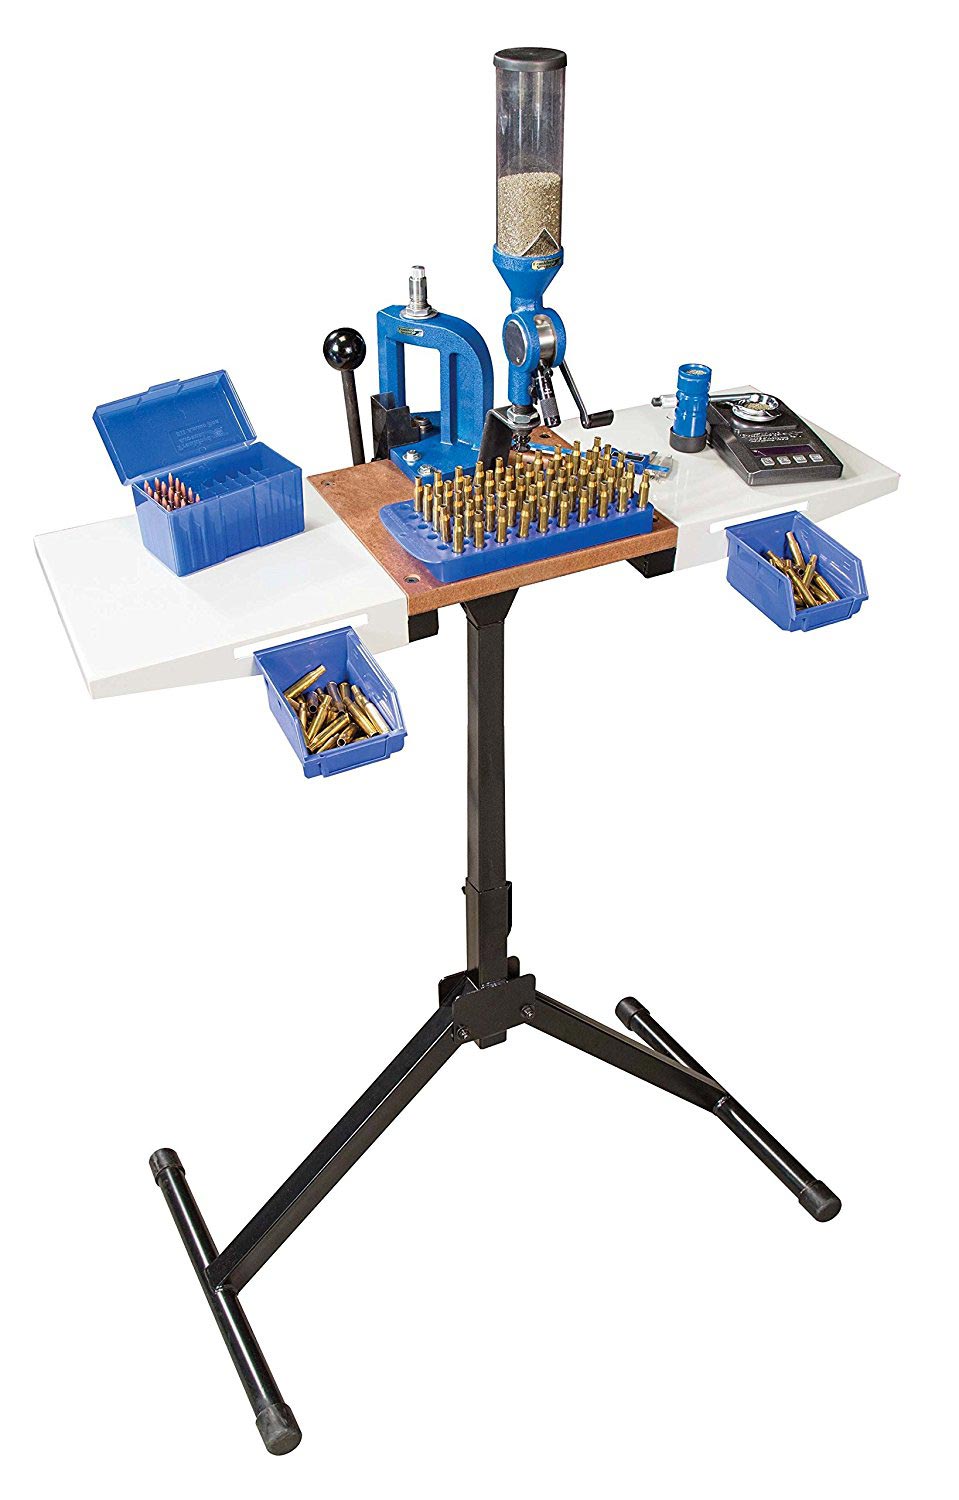 Frankford Platinum Series Reloading Stand